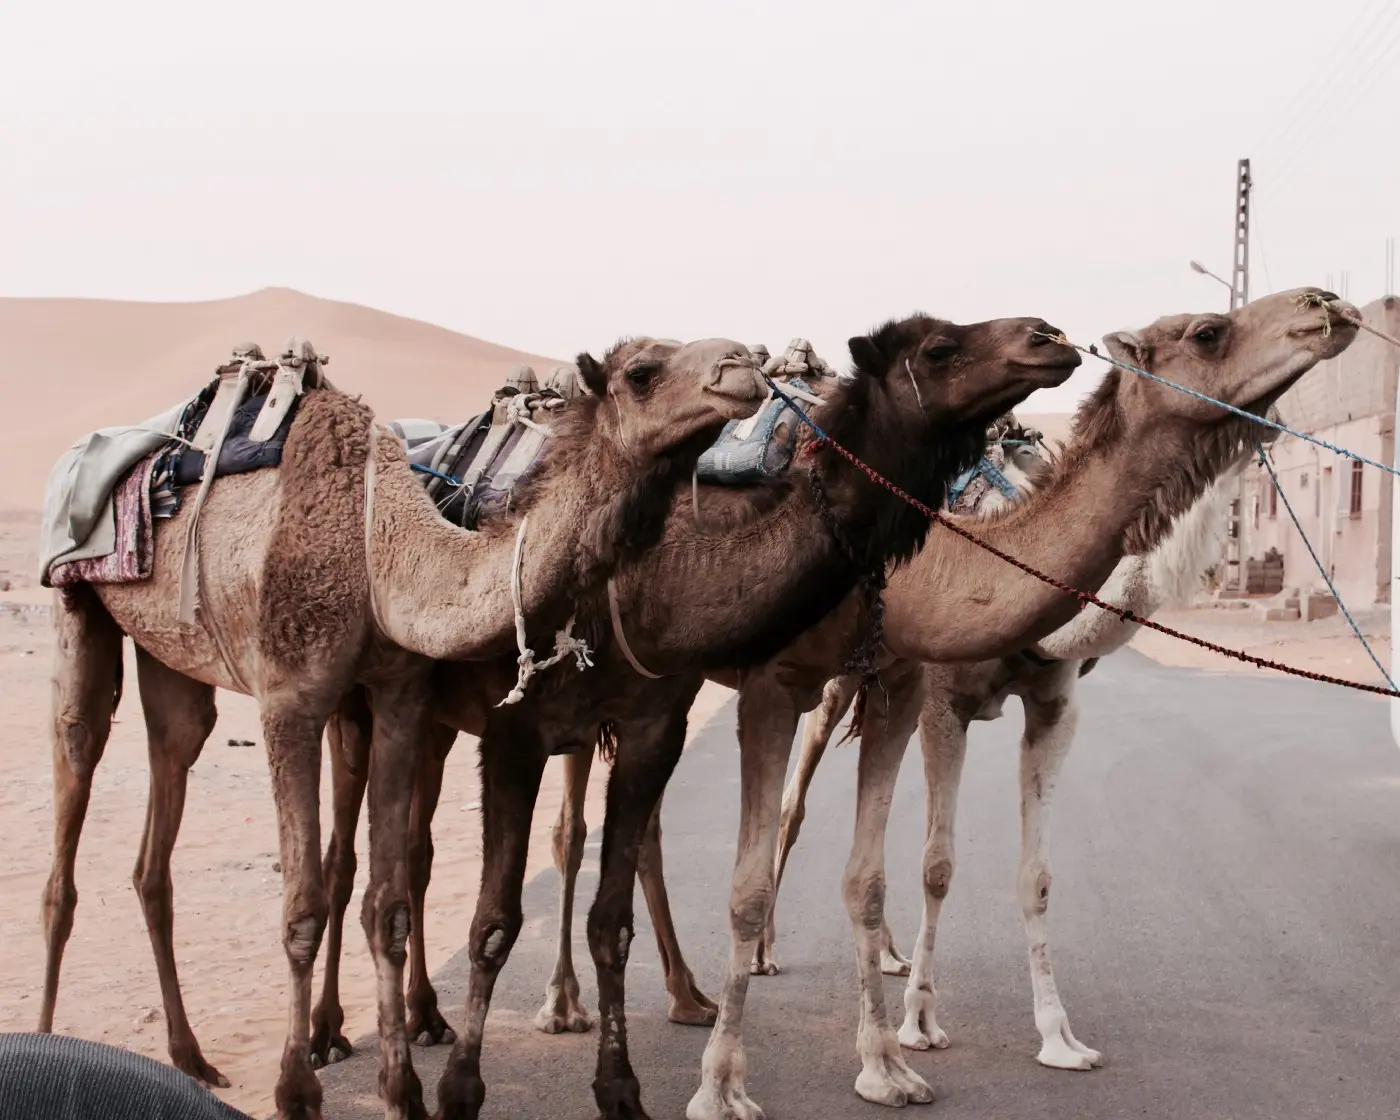 “three camels standing on street” by Lombe Kabaso on Unsplash